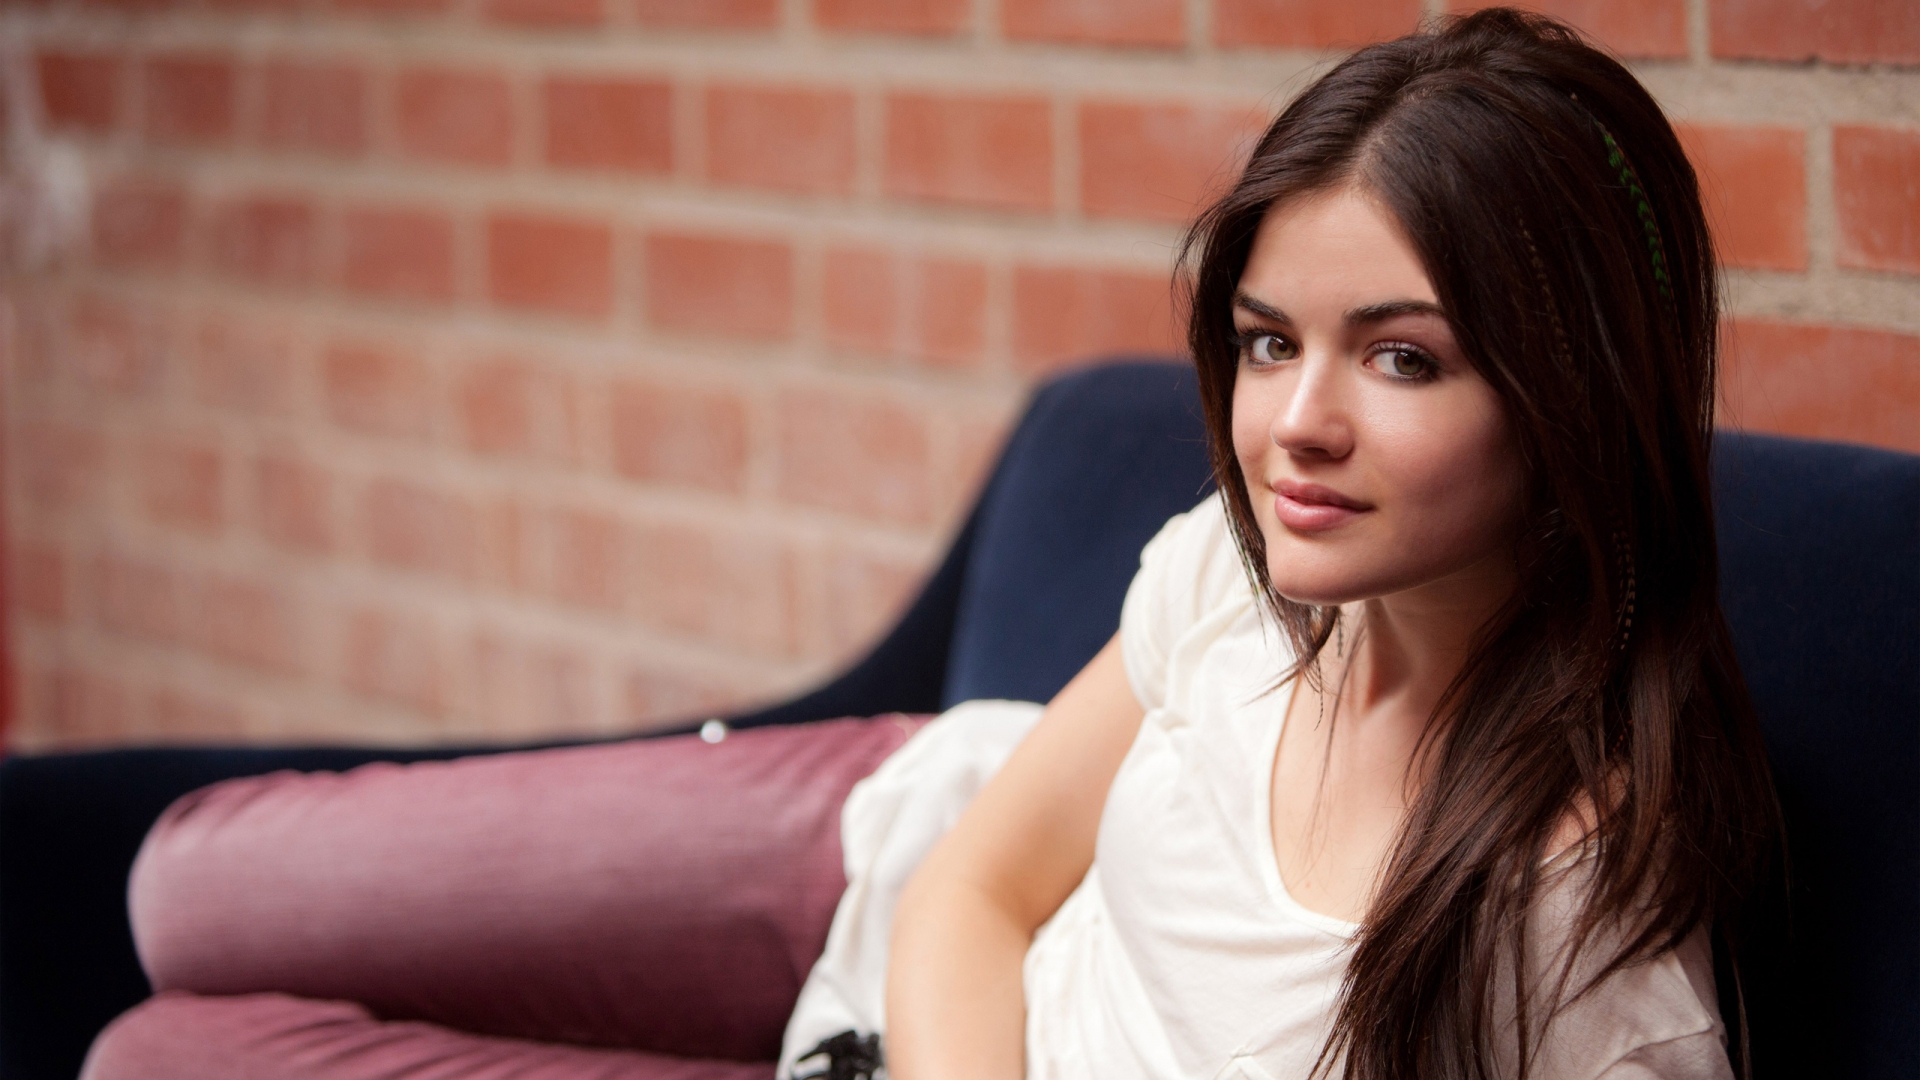 Lucy Hale Relaxing for 1920 x 1080 HDTV 1080p resolution